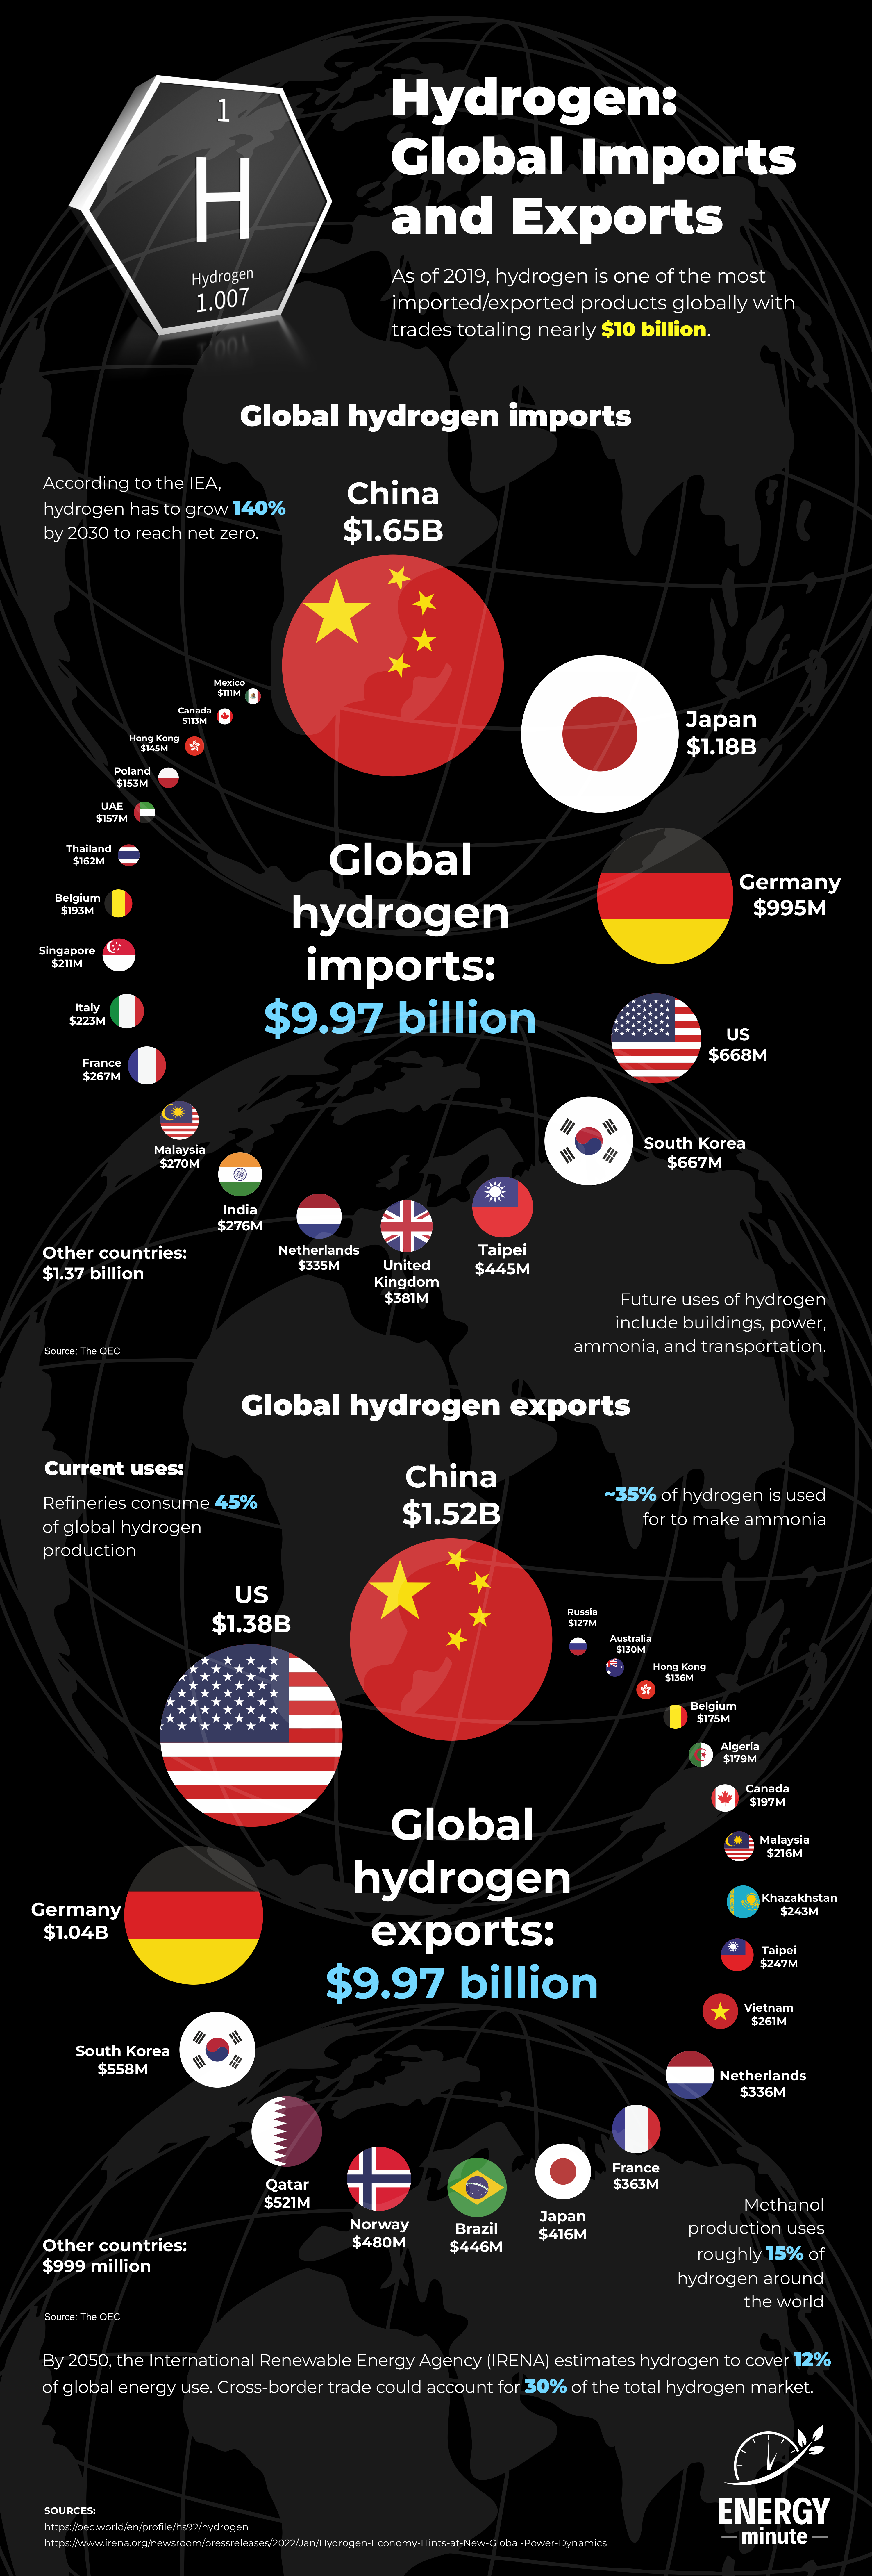 Hydrogen imports and exports